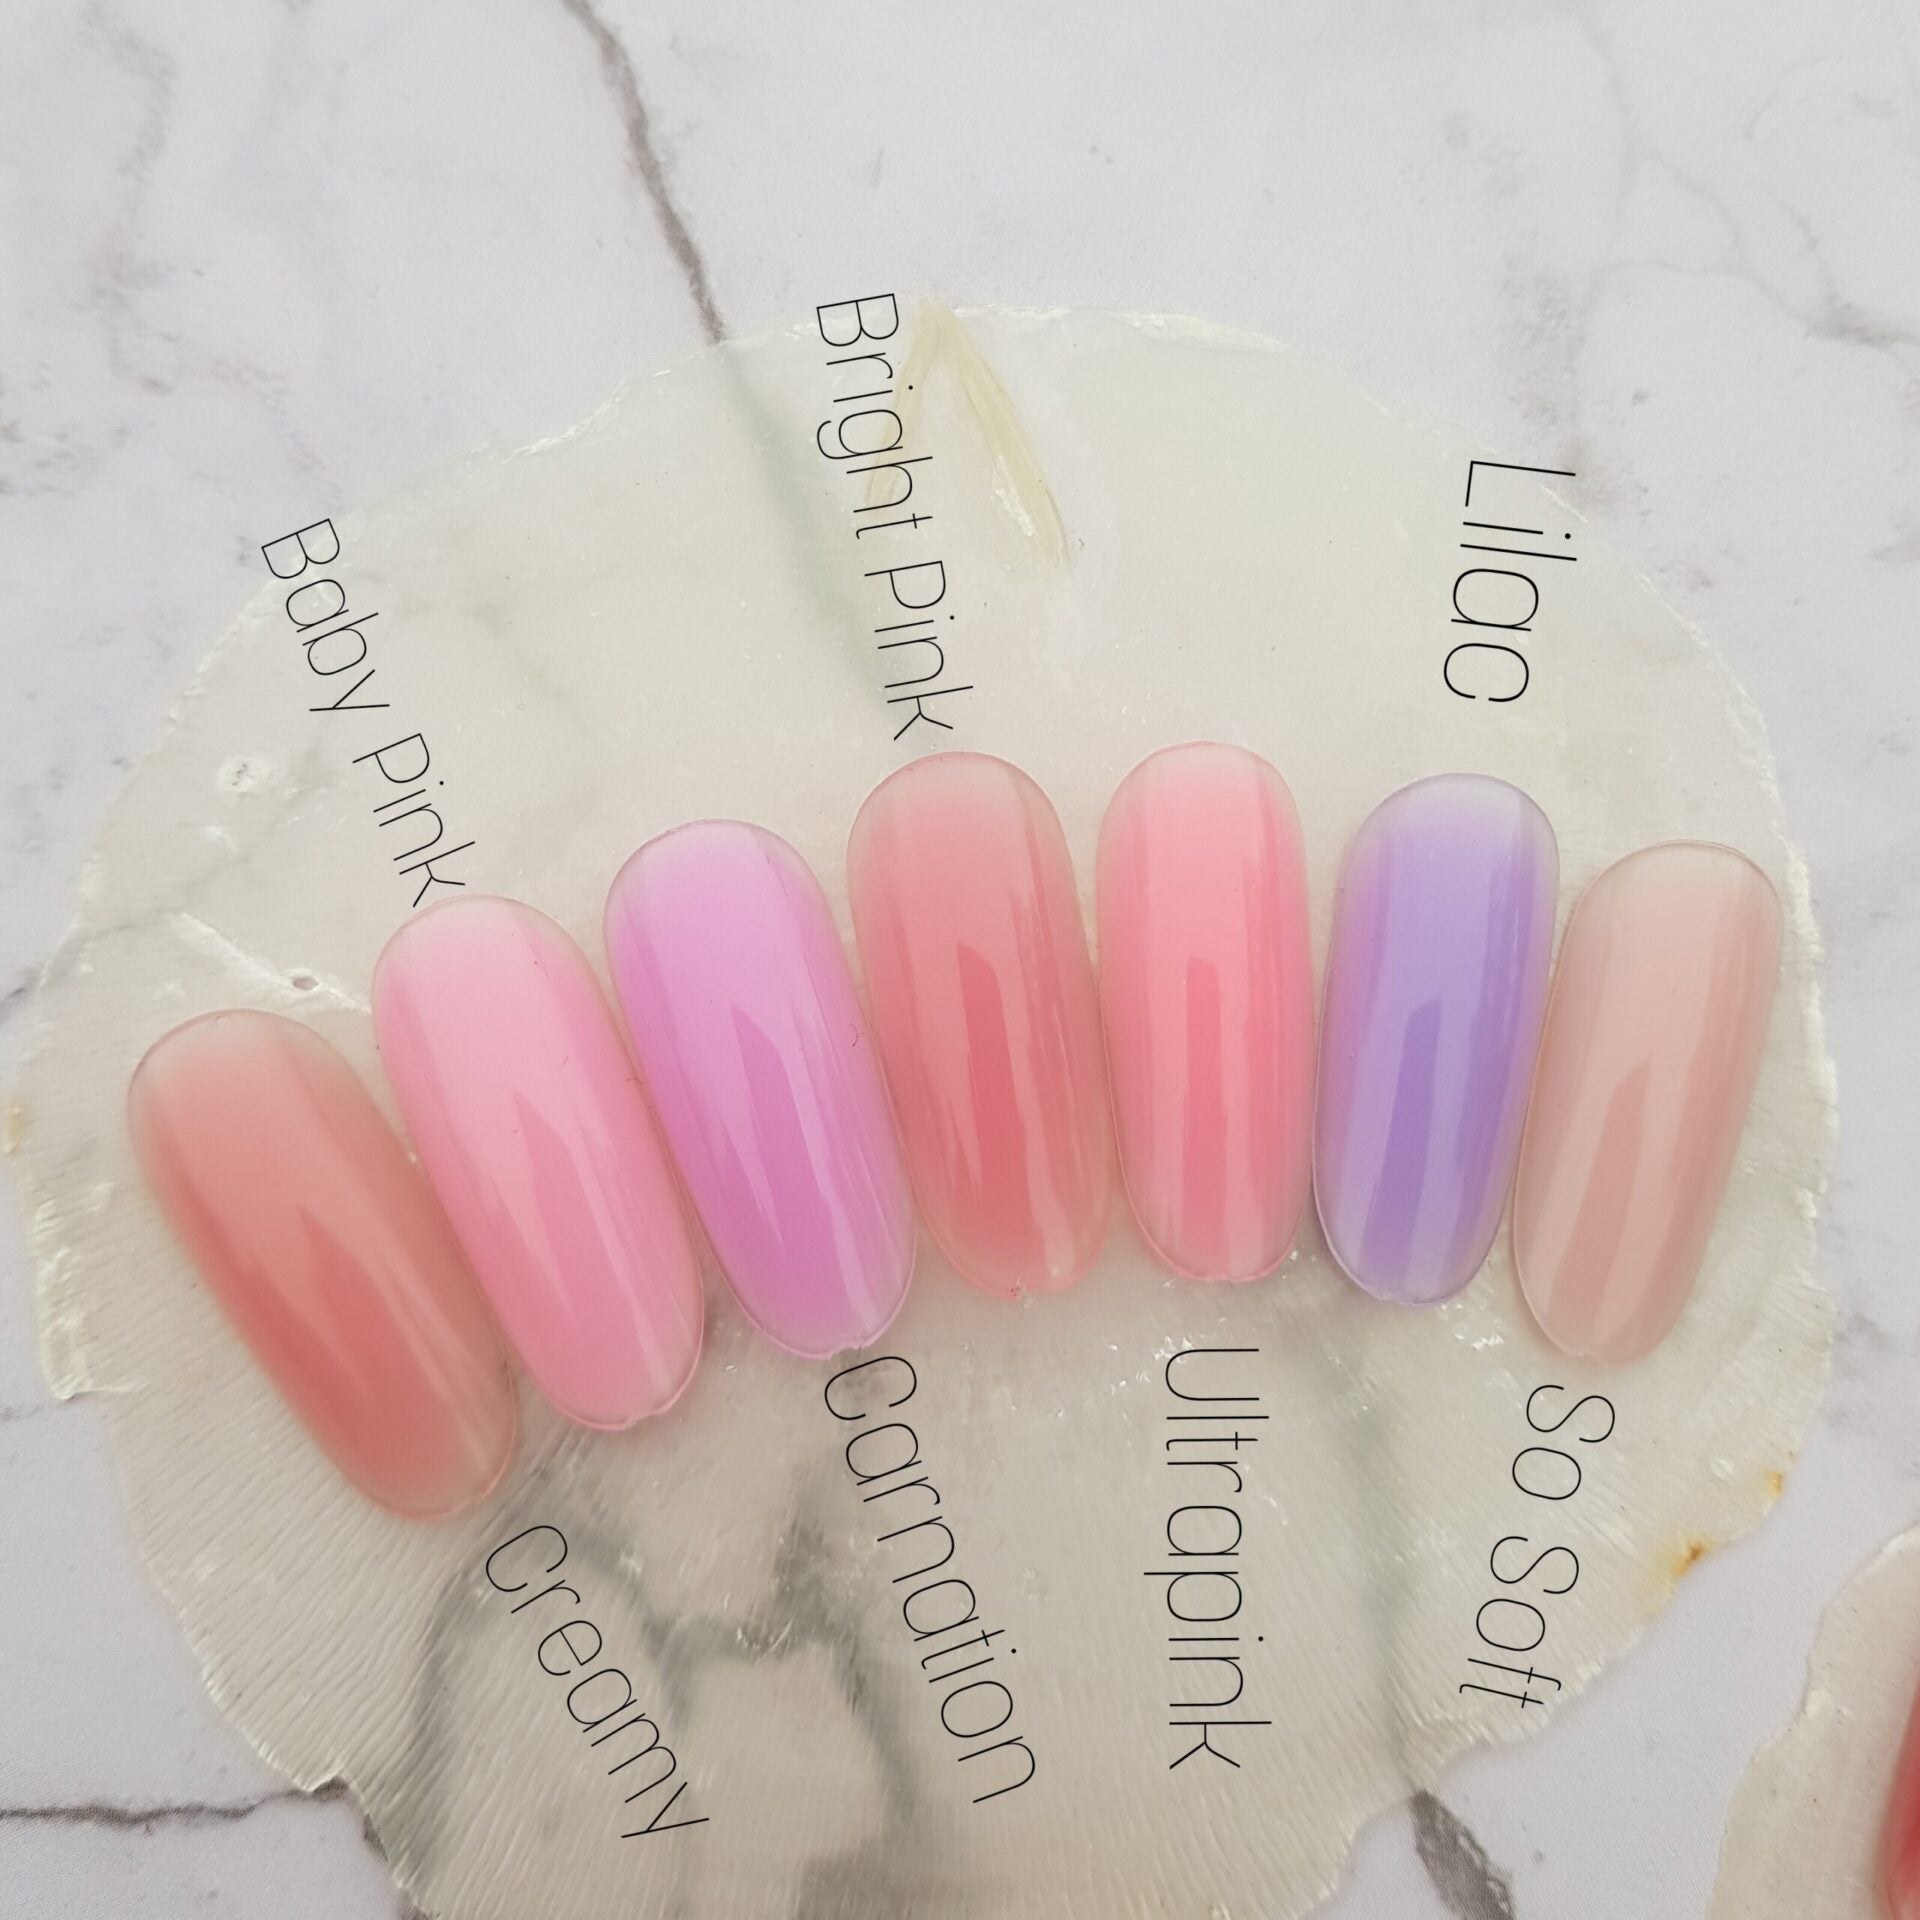 Nail Candy Build It Up! Bright Pink